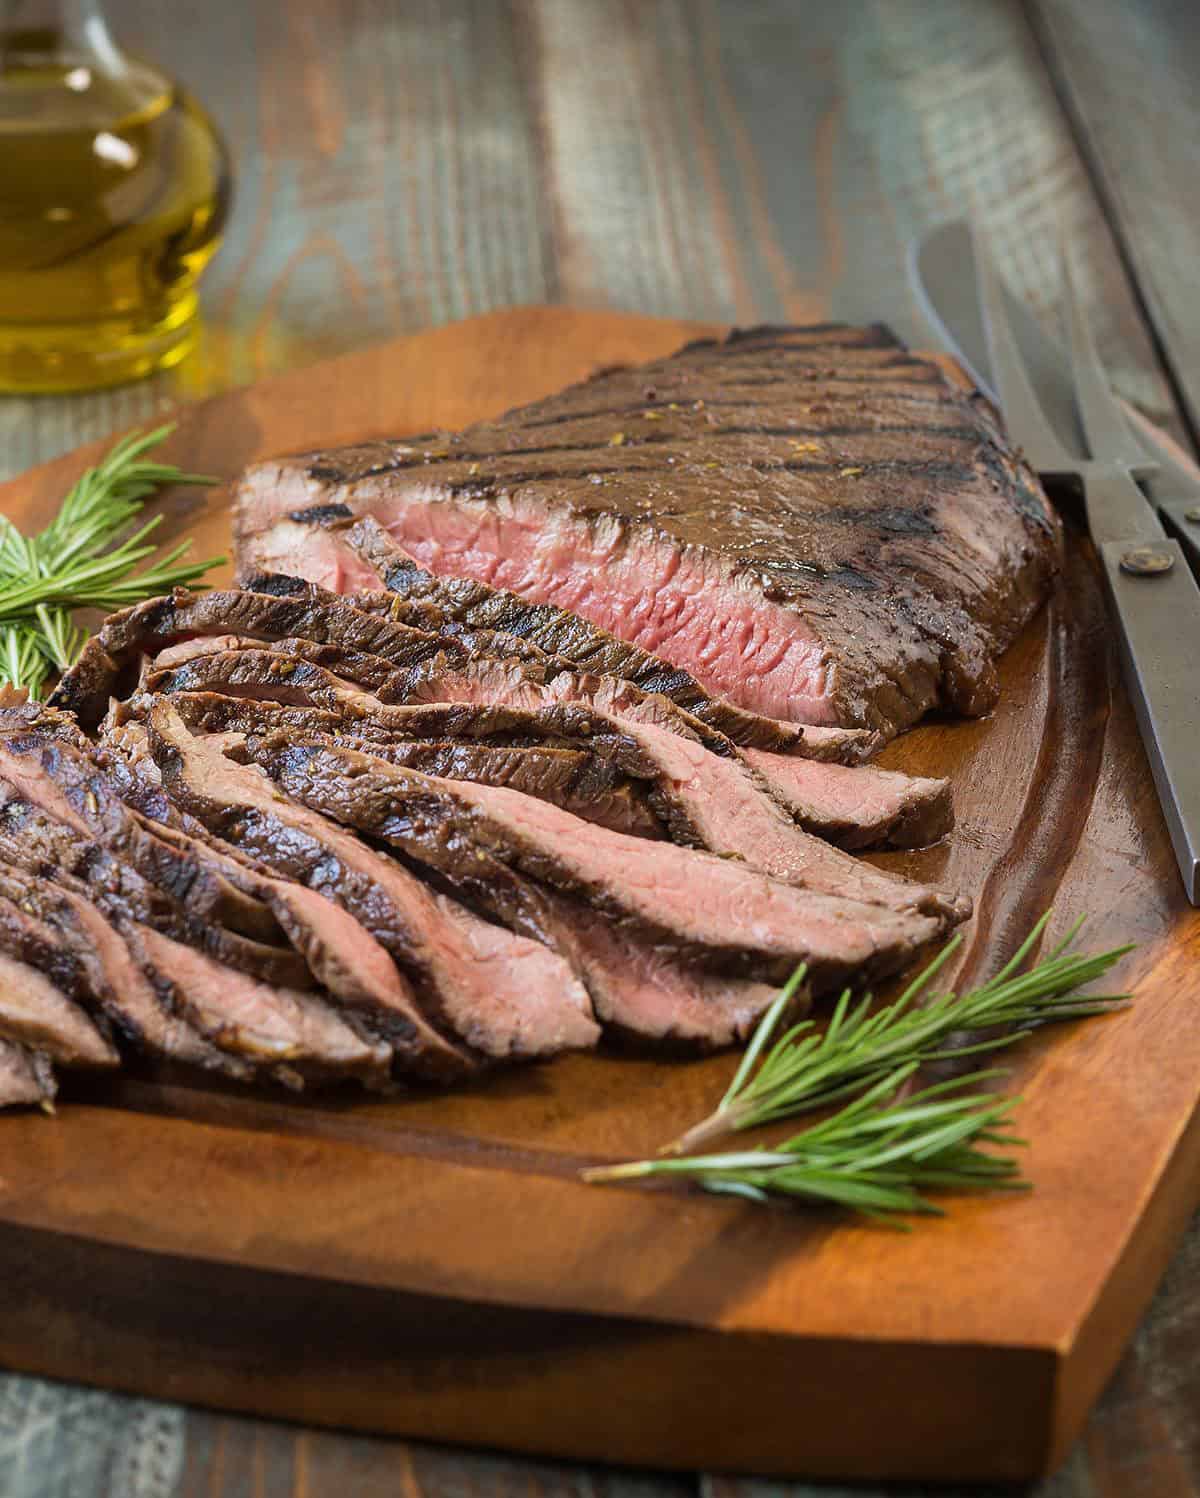  Get ready for a mouth-watering experience with this Grilled London Broil recipe.